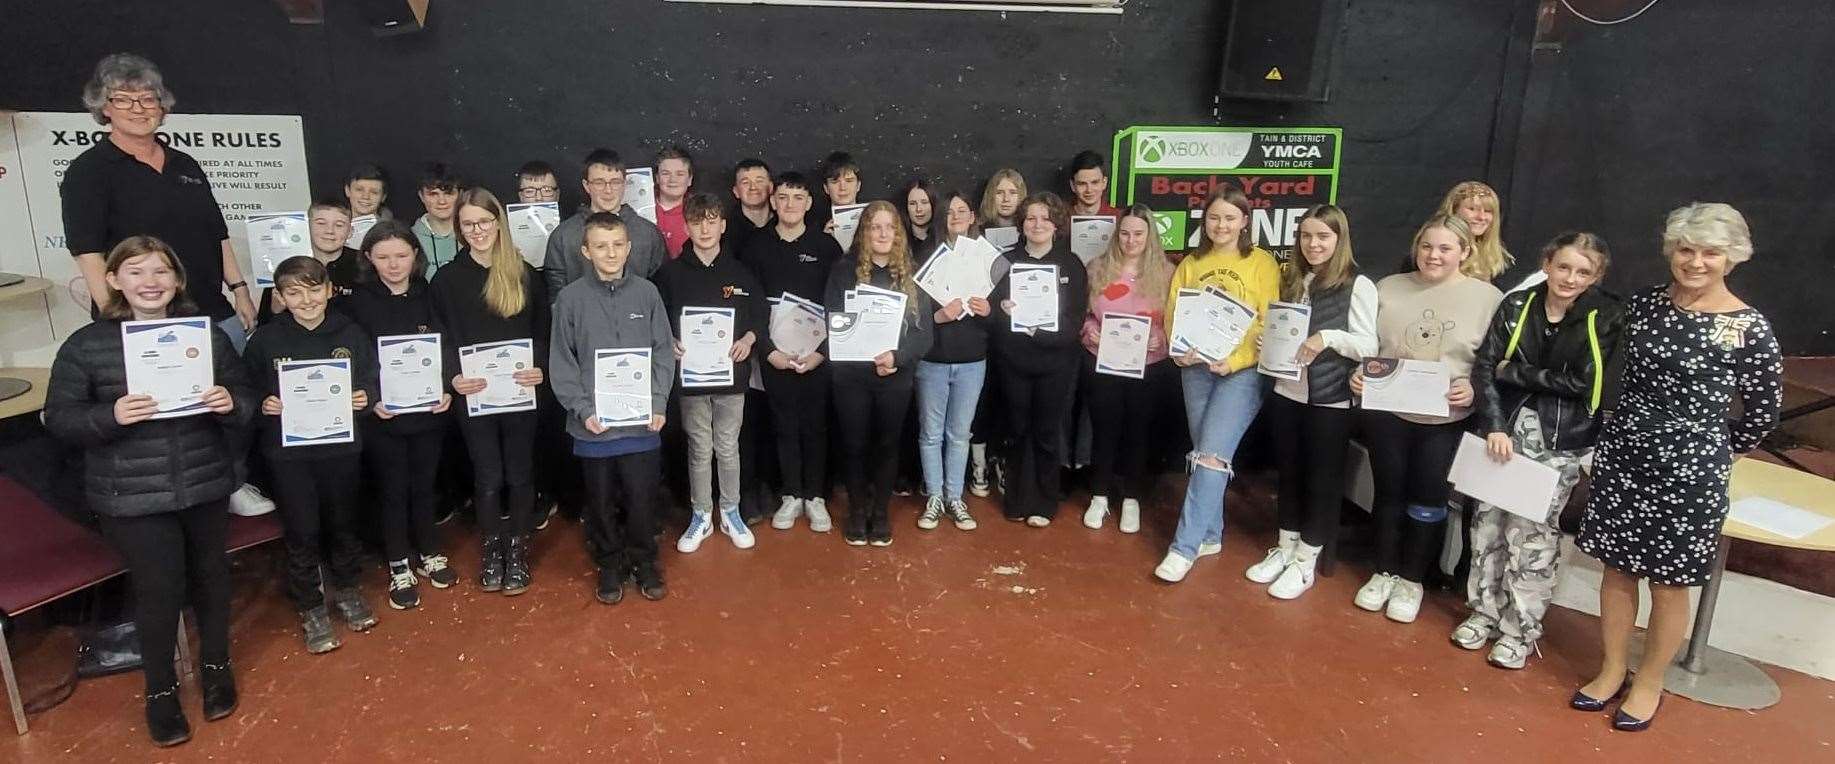 Tain YMCA's young members have given their time to 21 different organisations within the local community and in doing so have amassed a total of 2470 volunteering hours.